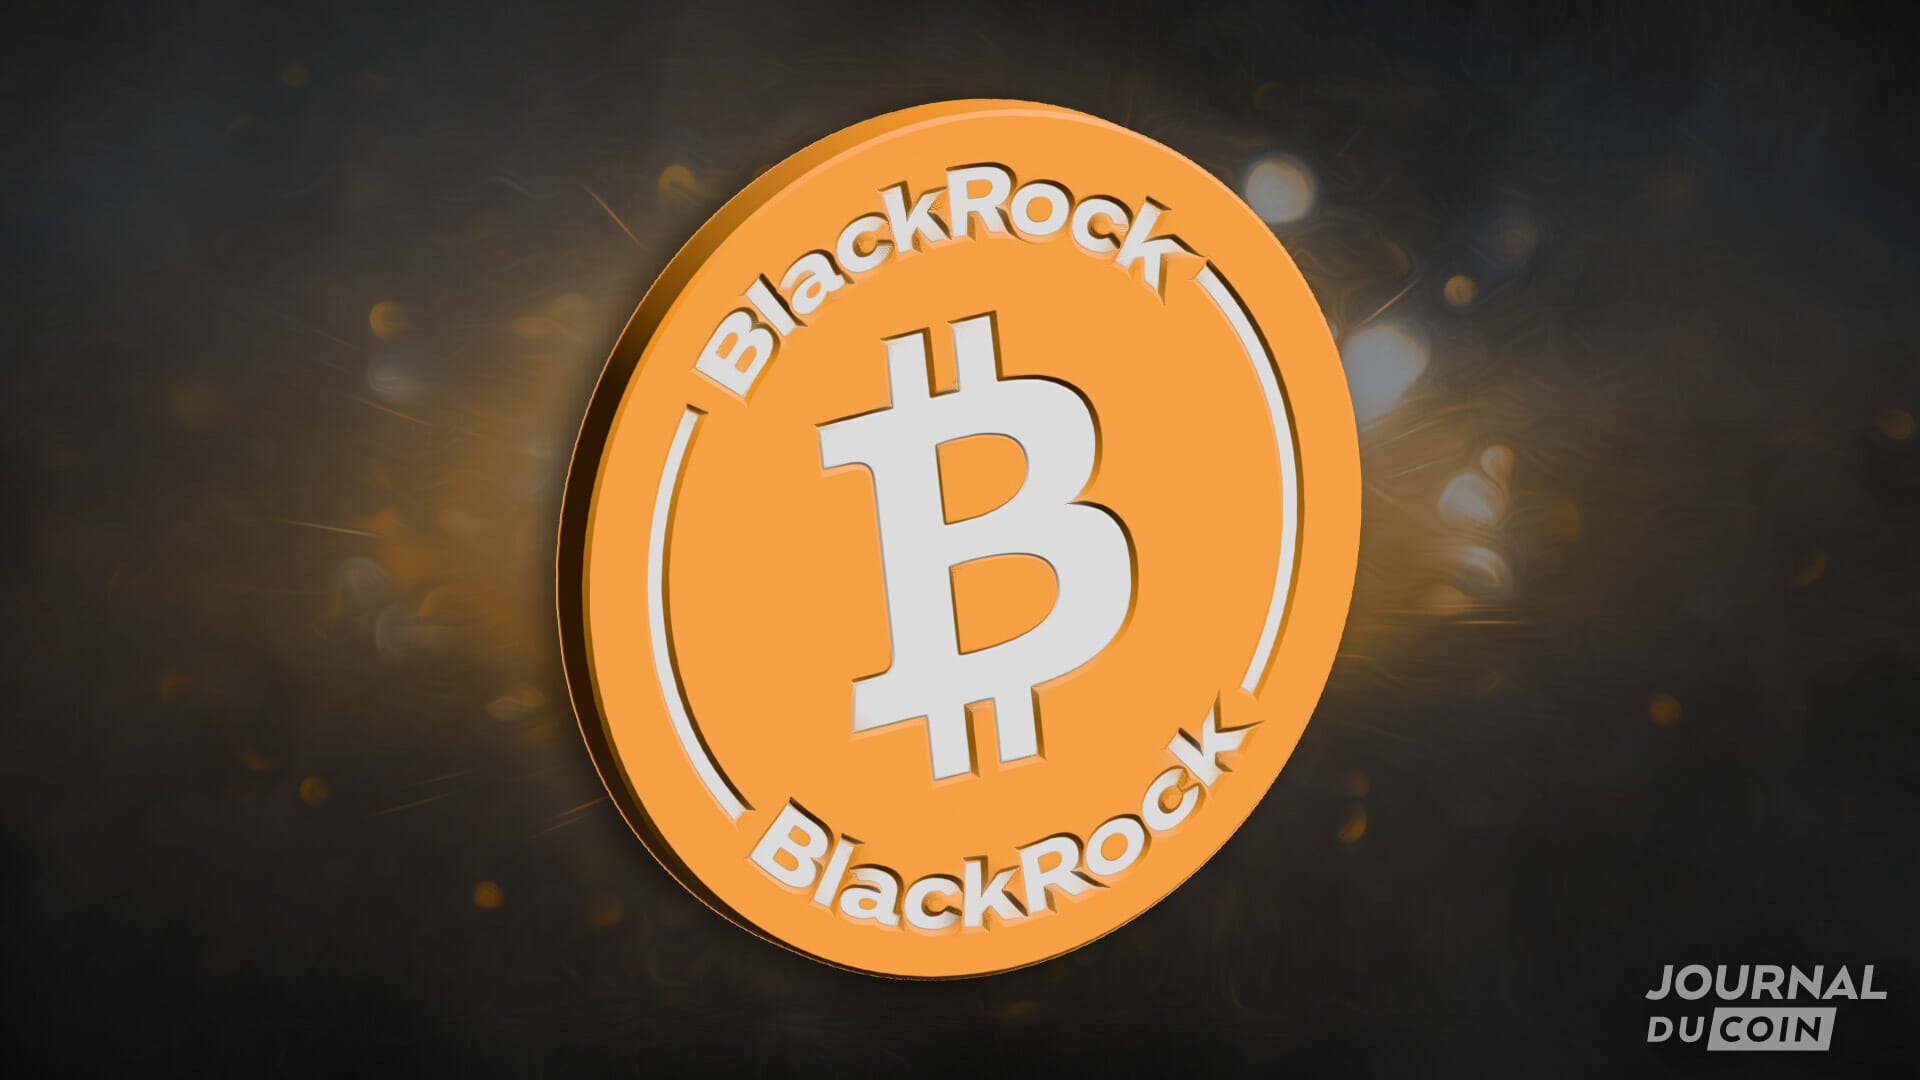 BlackRock and Bitwise have supplemented their Bitcoin spot ETF application by adding information regarding anti-money laundering and monitoring unusual price movements.  Let's see if this will be enough to reassure the SEC!